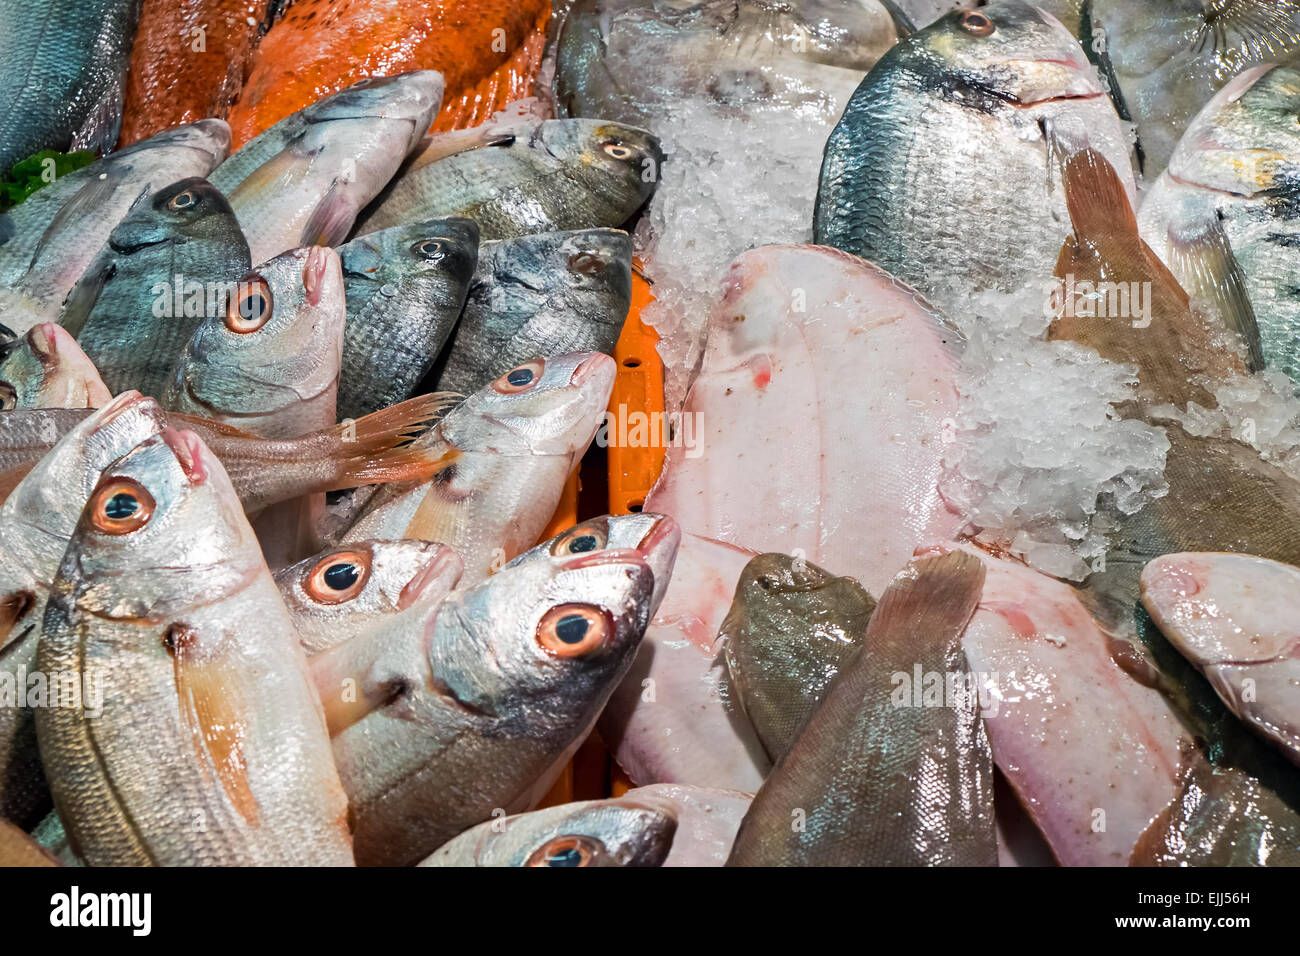 Many different fishes for sale at a market Stock Photo